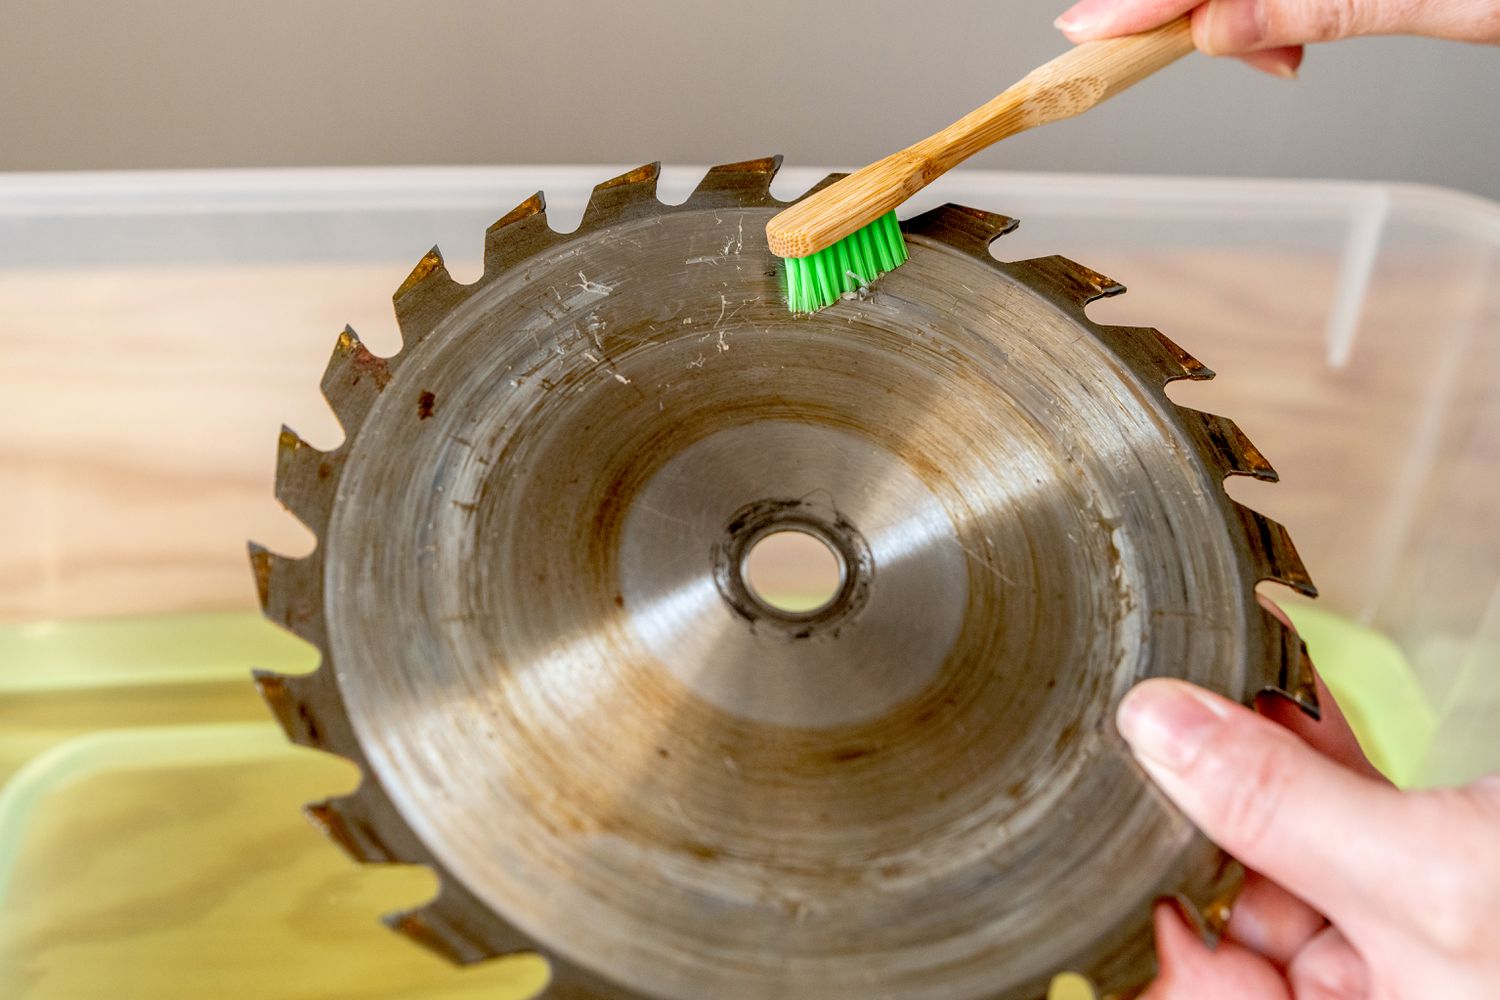 Dirty saw blade scrubbed with toothbrush over cleaning container